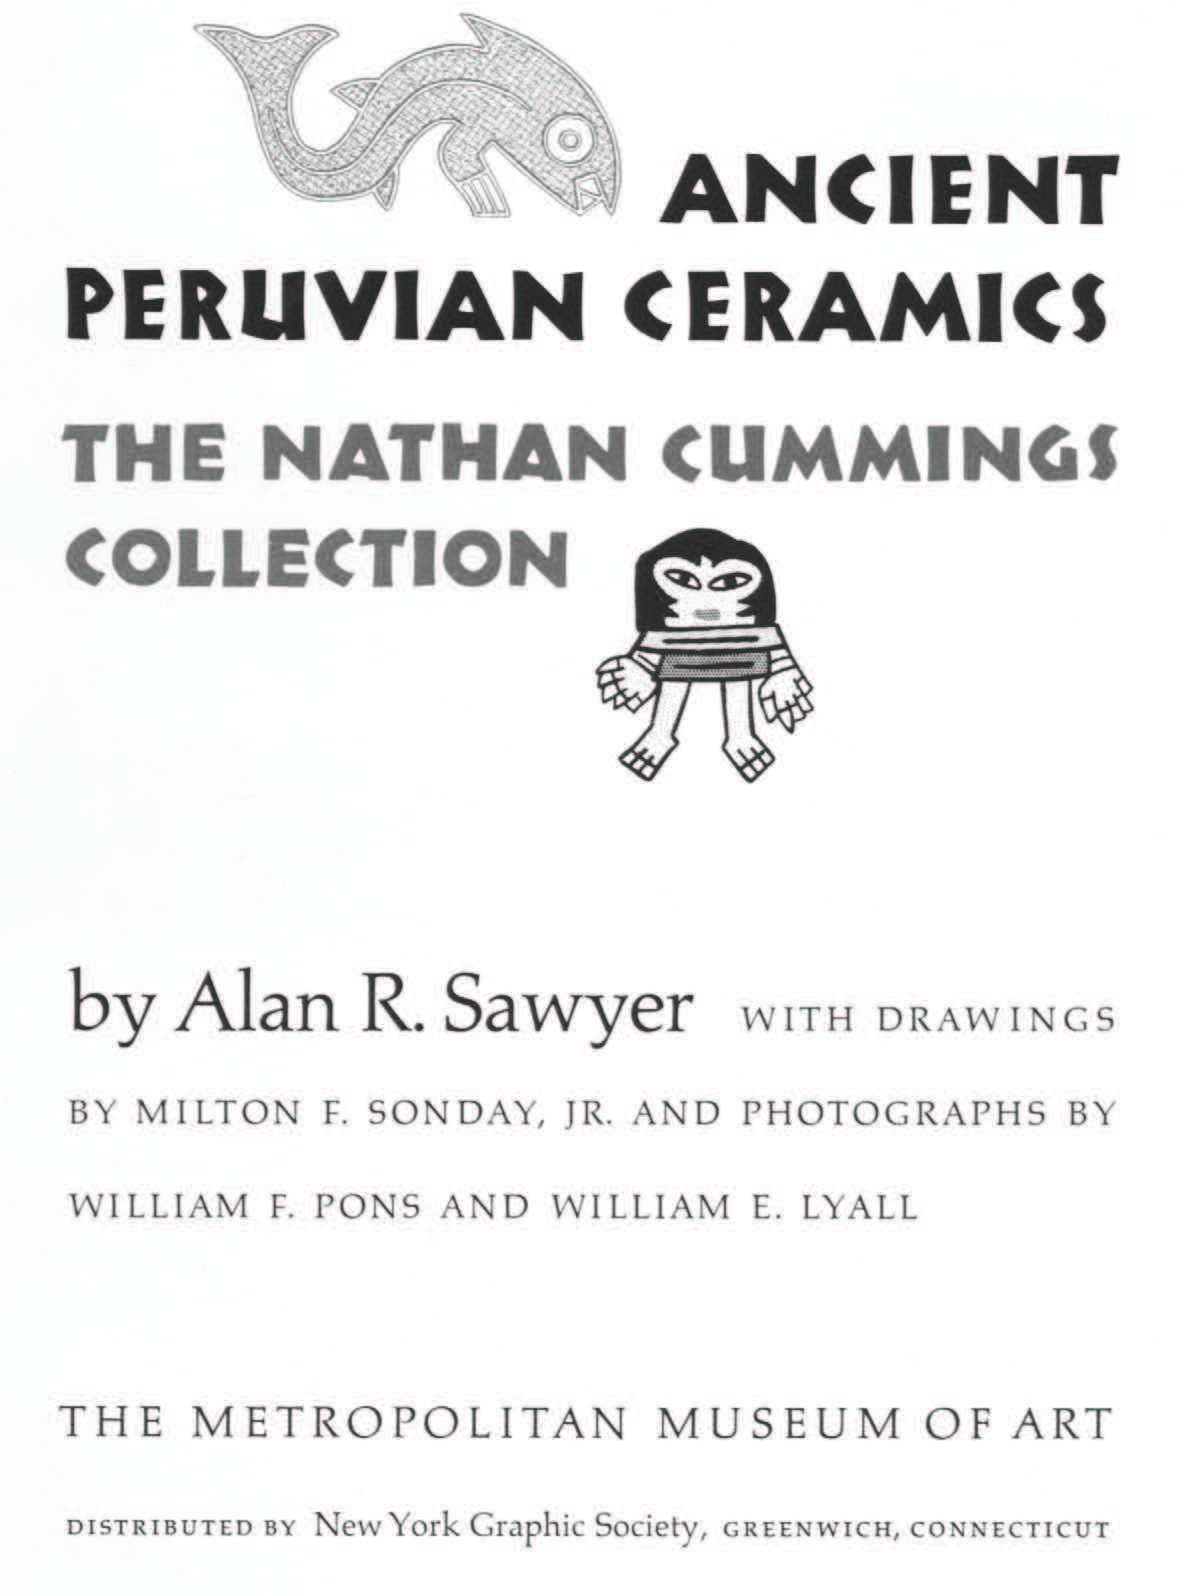 Ancient Peruvian Ceramics: The Nathan Cummings Collection / by Alan R. Sawyer with drawings by Milton F. Sonday, Jr. and photographs by William F. Pons and William E. Lyall. — New York : The Metropolitan Museum of Art, 1966